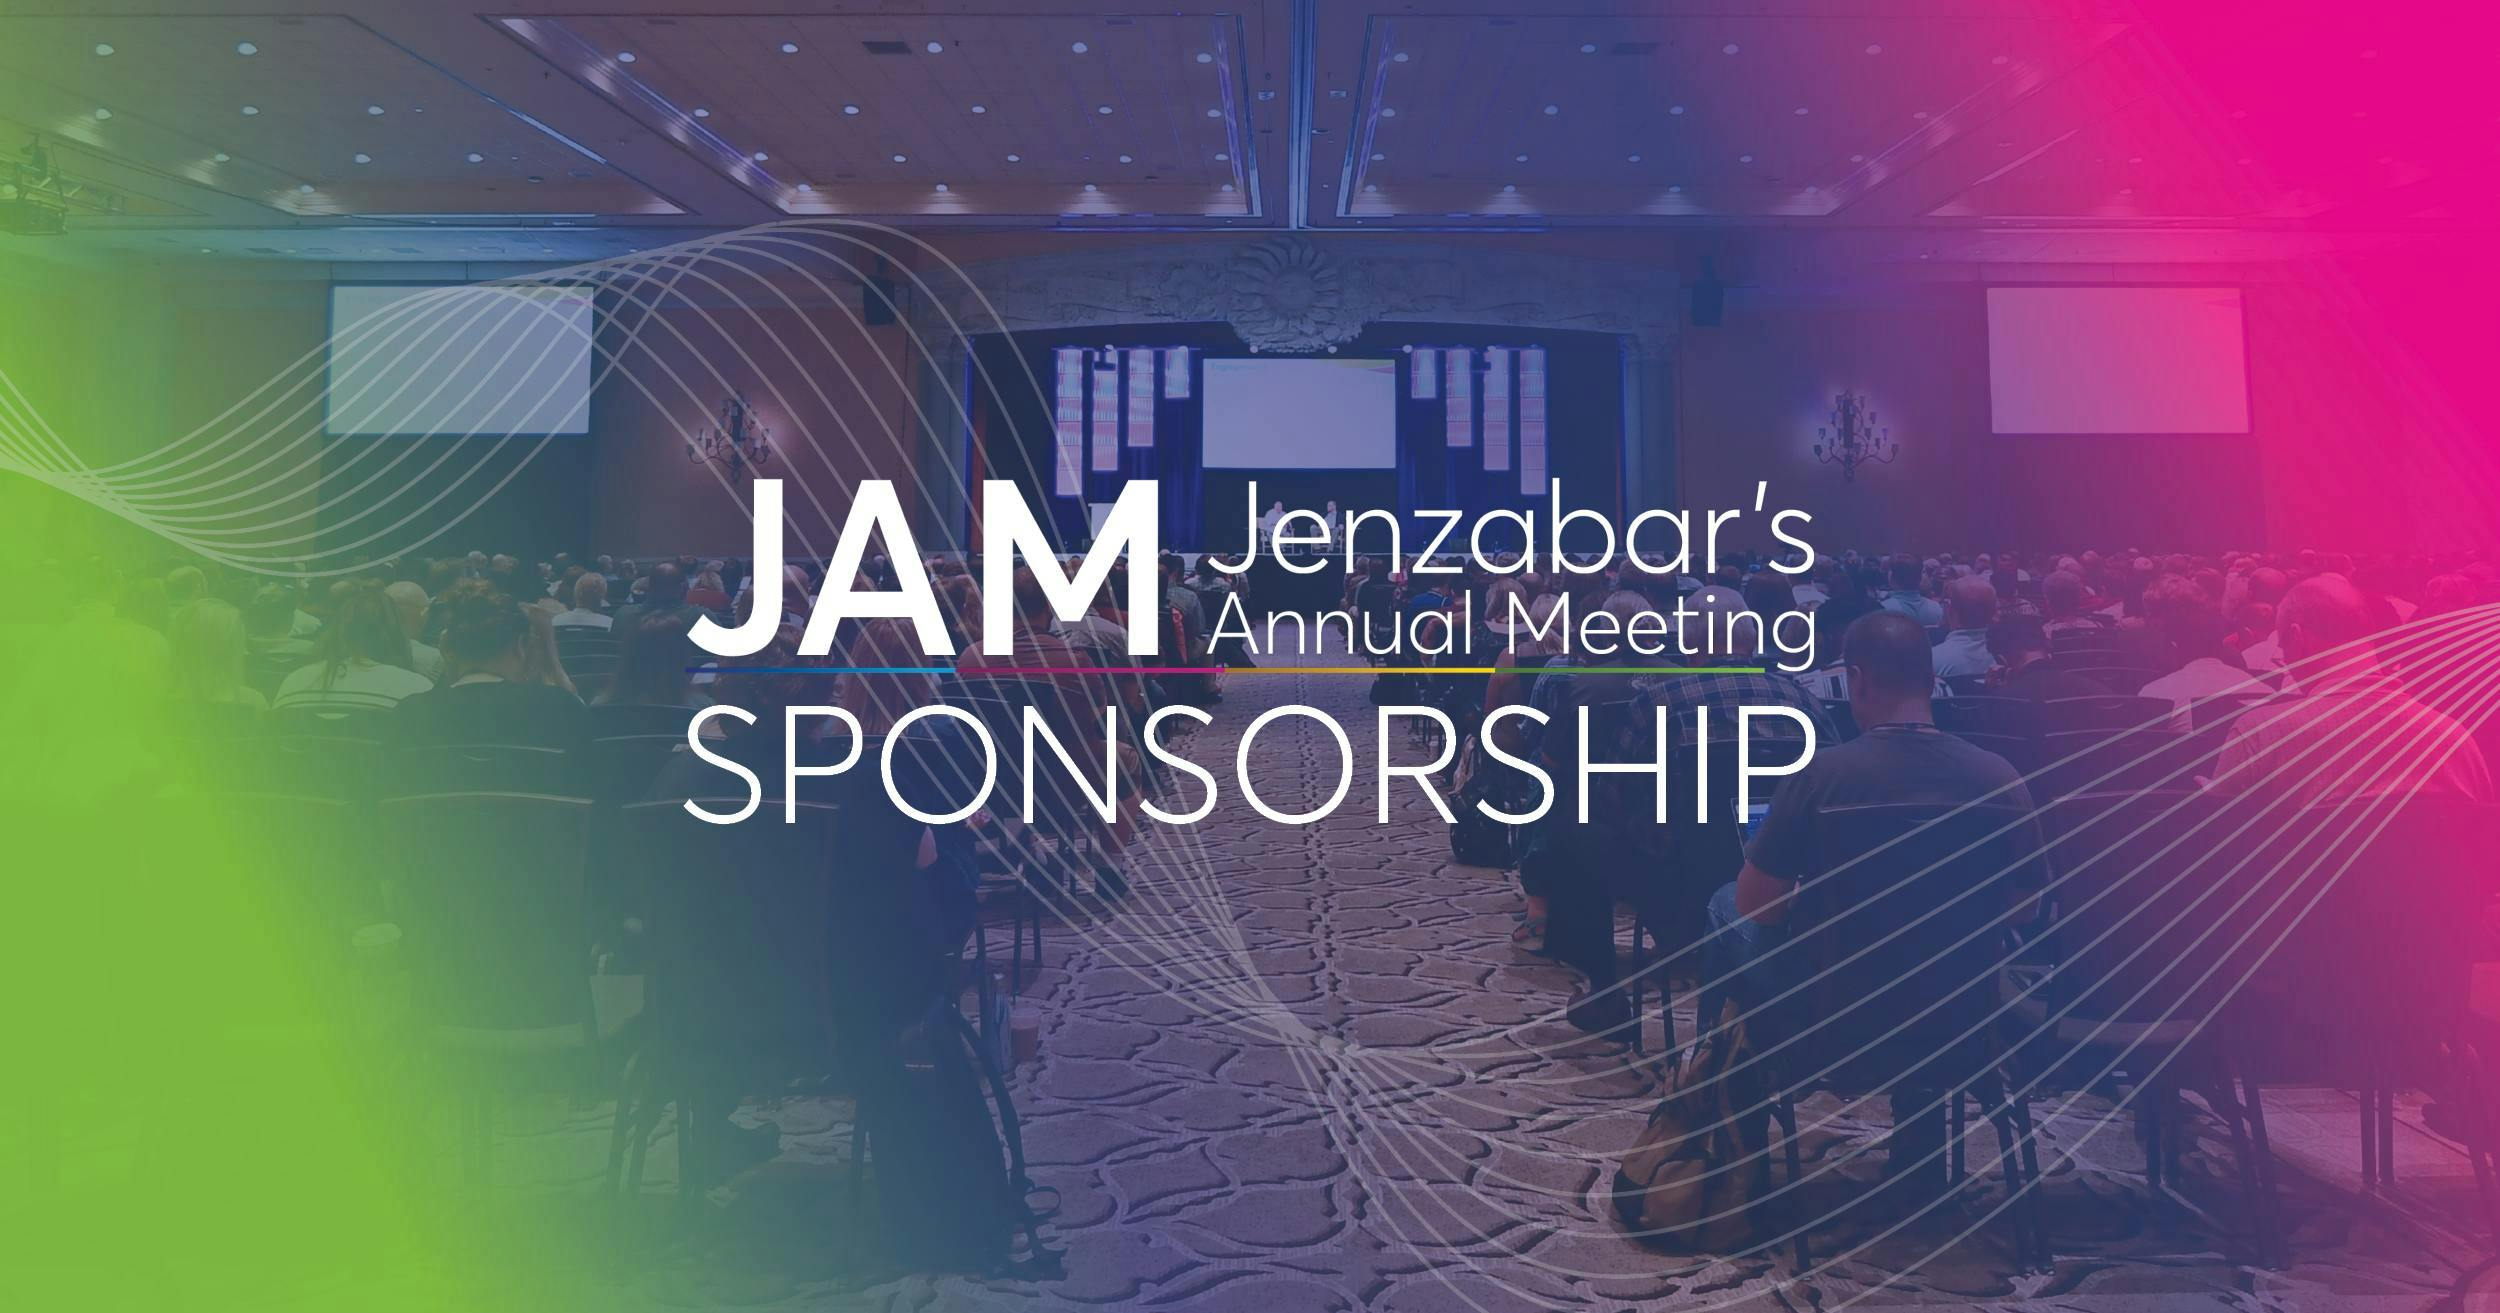 Sponsorship Opportunities at Jenzabar's Annual Meeting